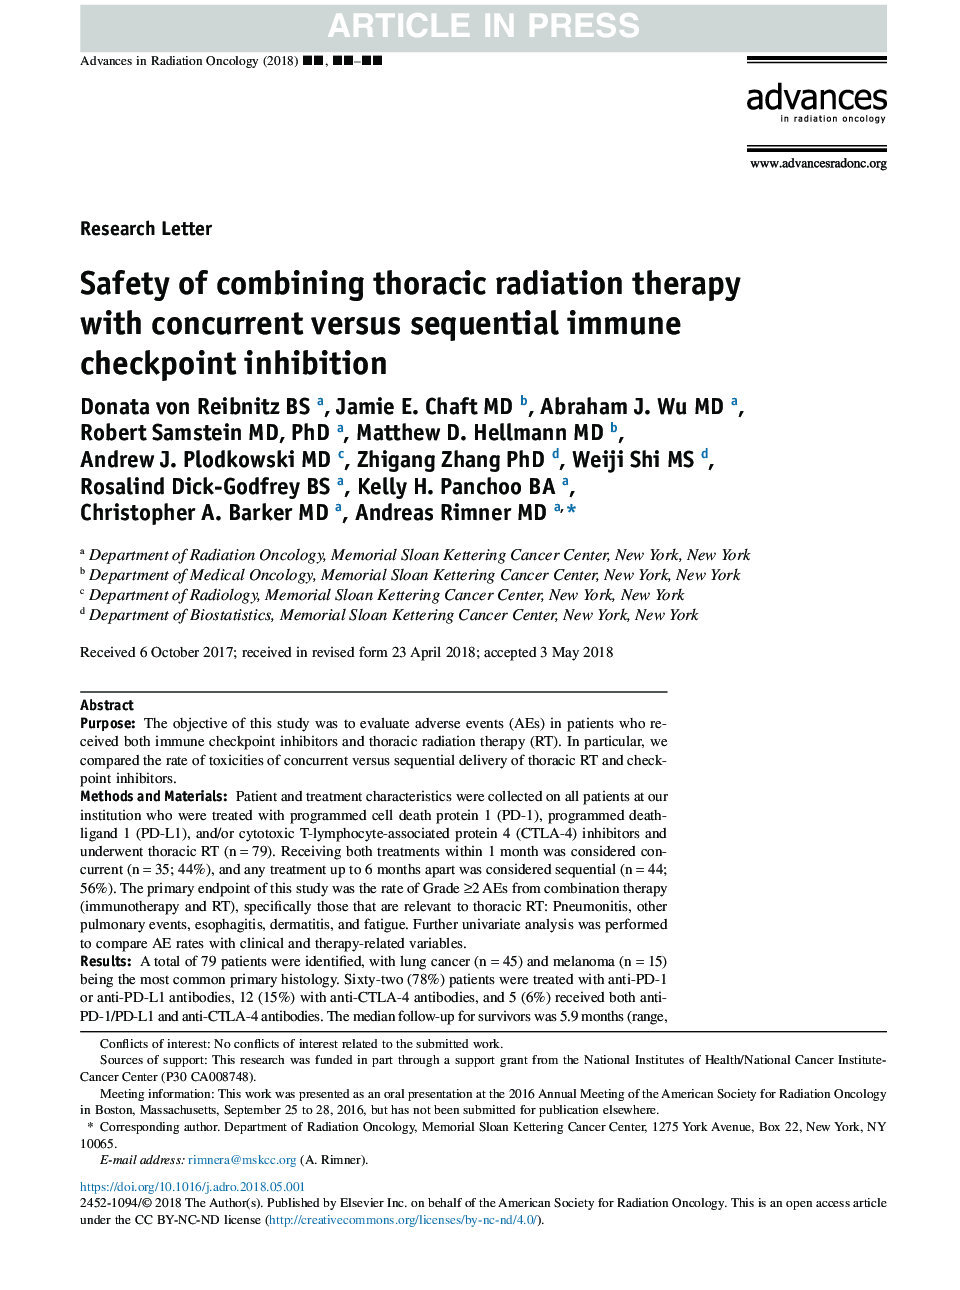 Safety of combining thoracic radiation therapy with concurrent versus sequential immune checkpoint inhibition